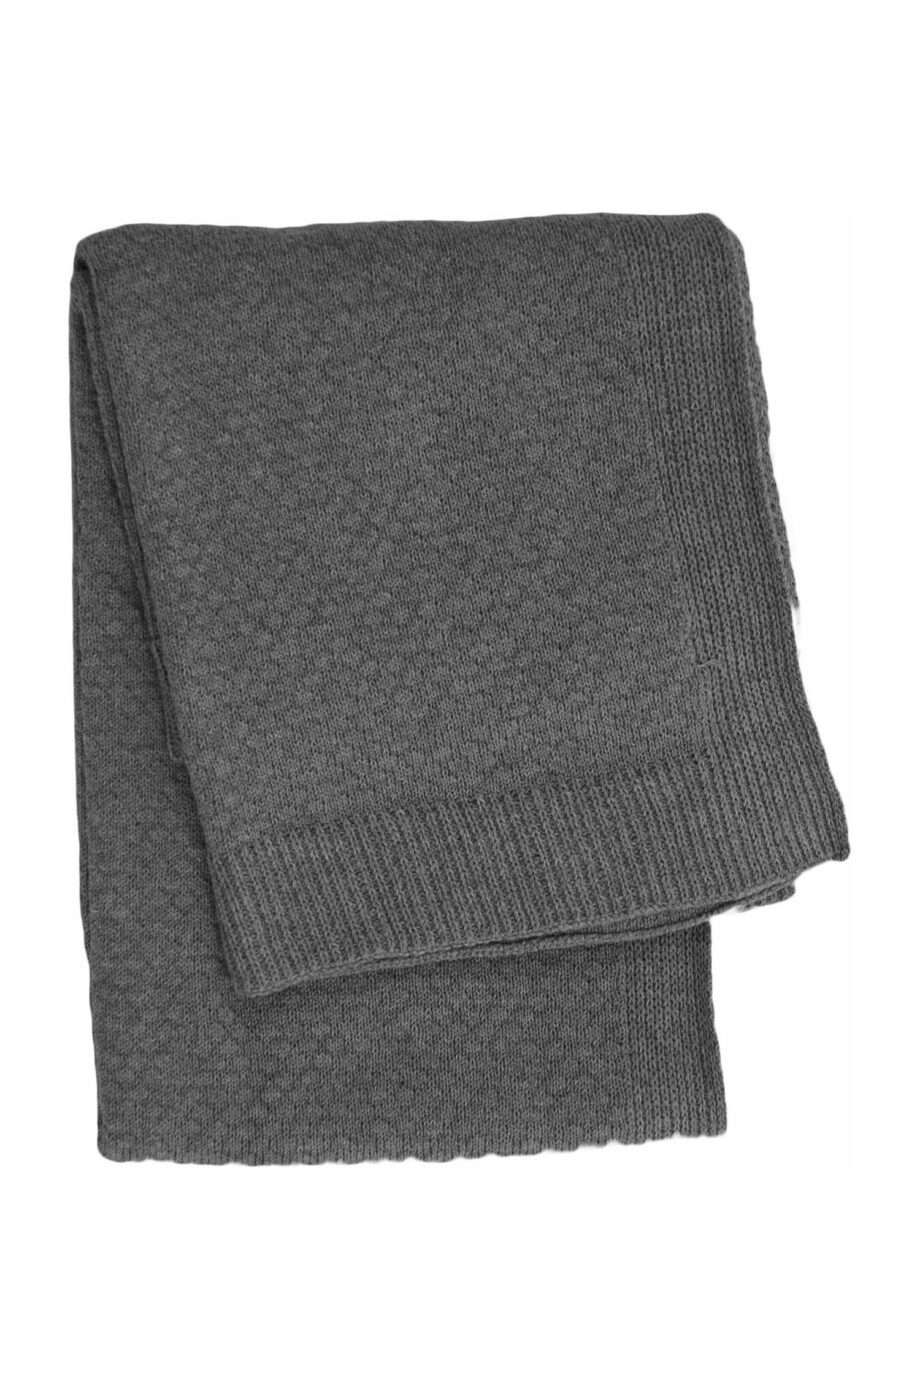 liz anthracite knitted cotton little blanket small